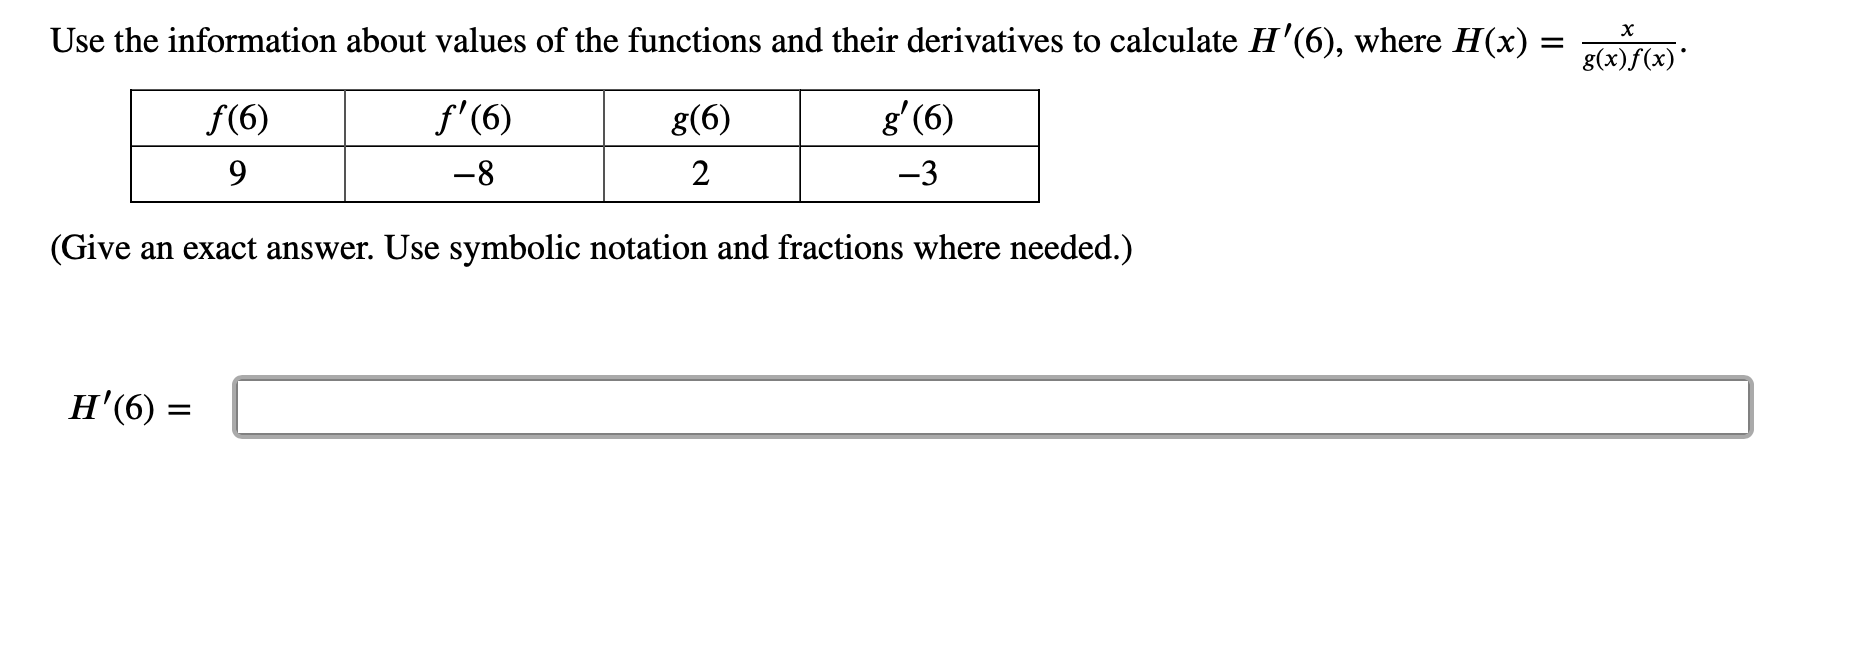 Use the information about values of the functions and their derivatives to calculate H'(6), where H(x)
х
f'(6)
g' (6)
f(6)
g(6)
9
-8
2
-3
(Give an exact answer. Use symbolic notation and fractions where needed.)
Н (6)
